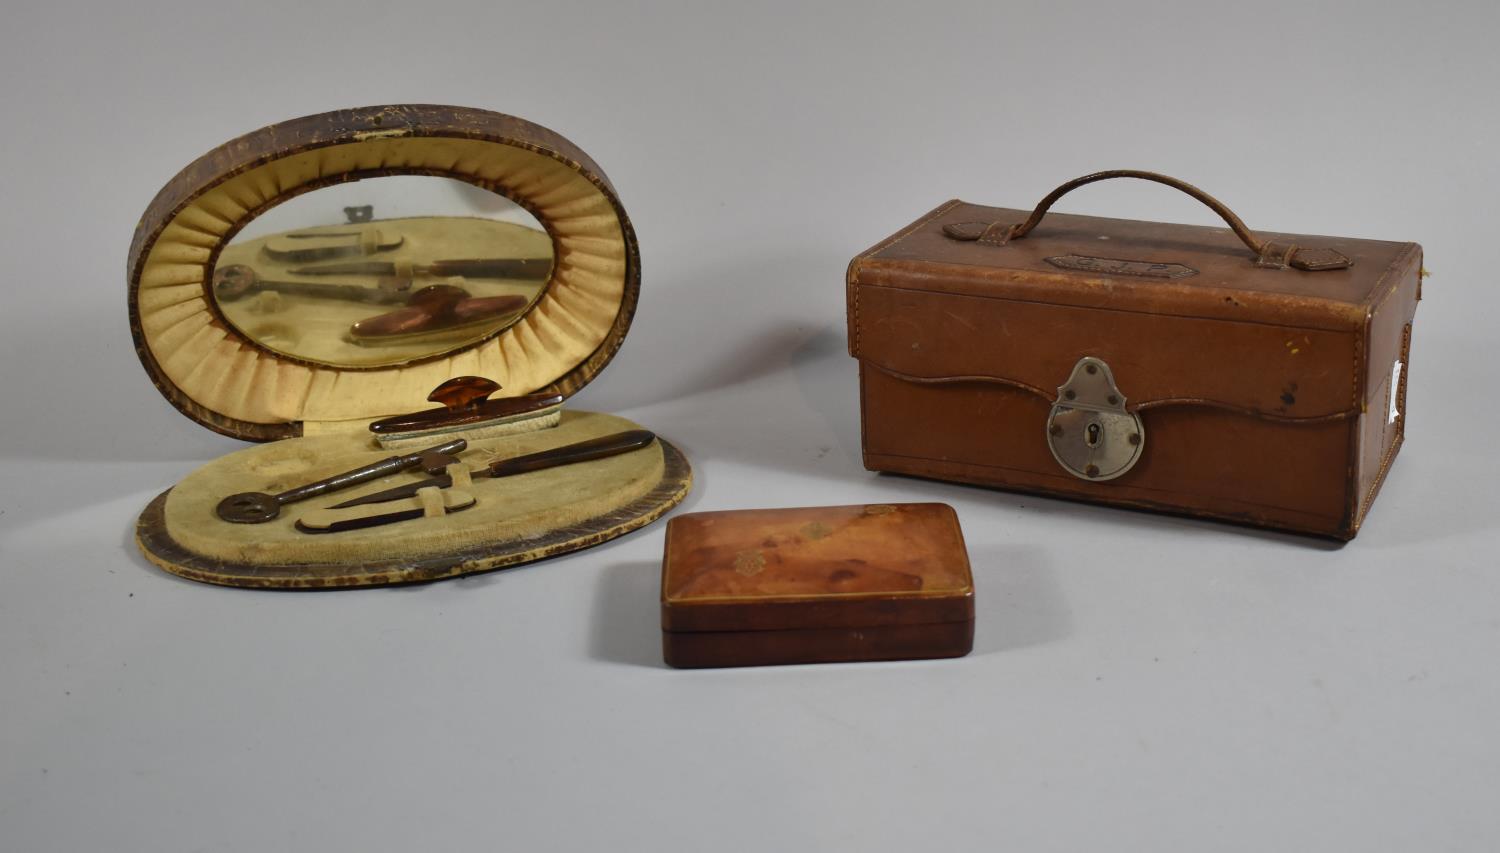 An Early 20th Century Oval Crocodile Skin Manicure Set Together with an Italian Leather Stud Box and